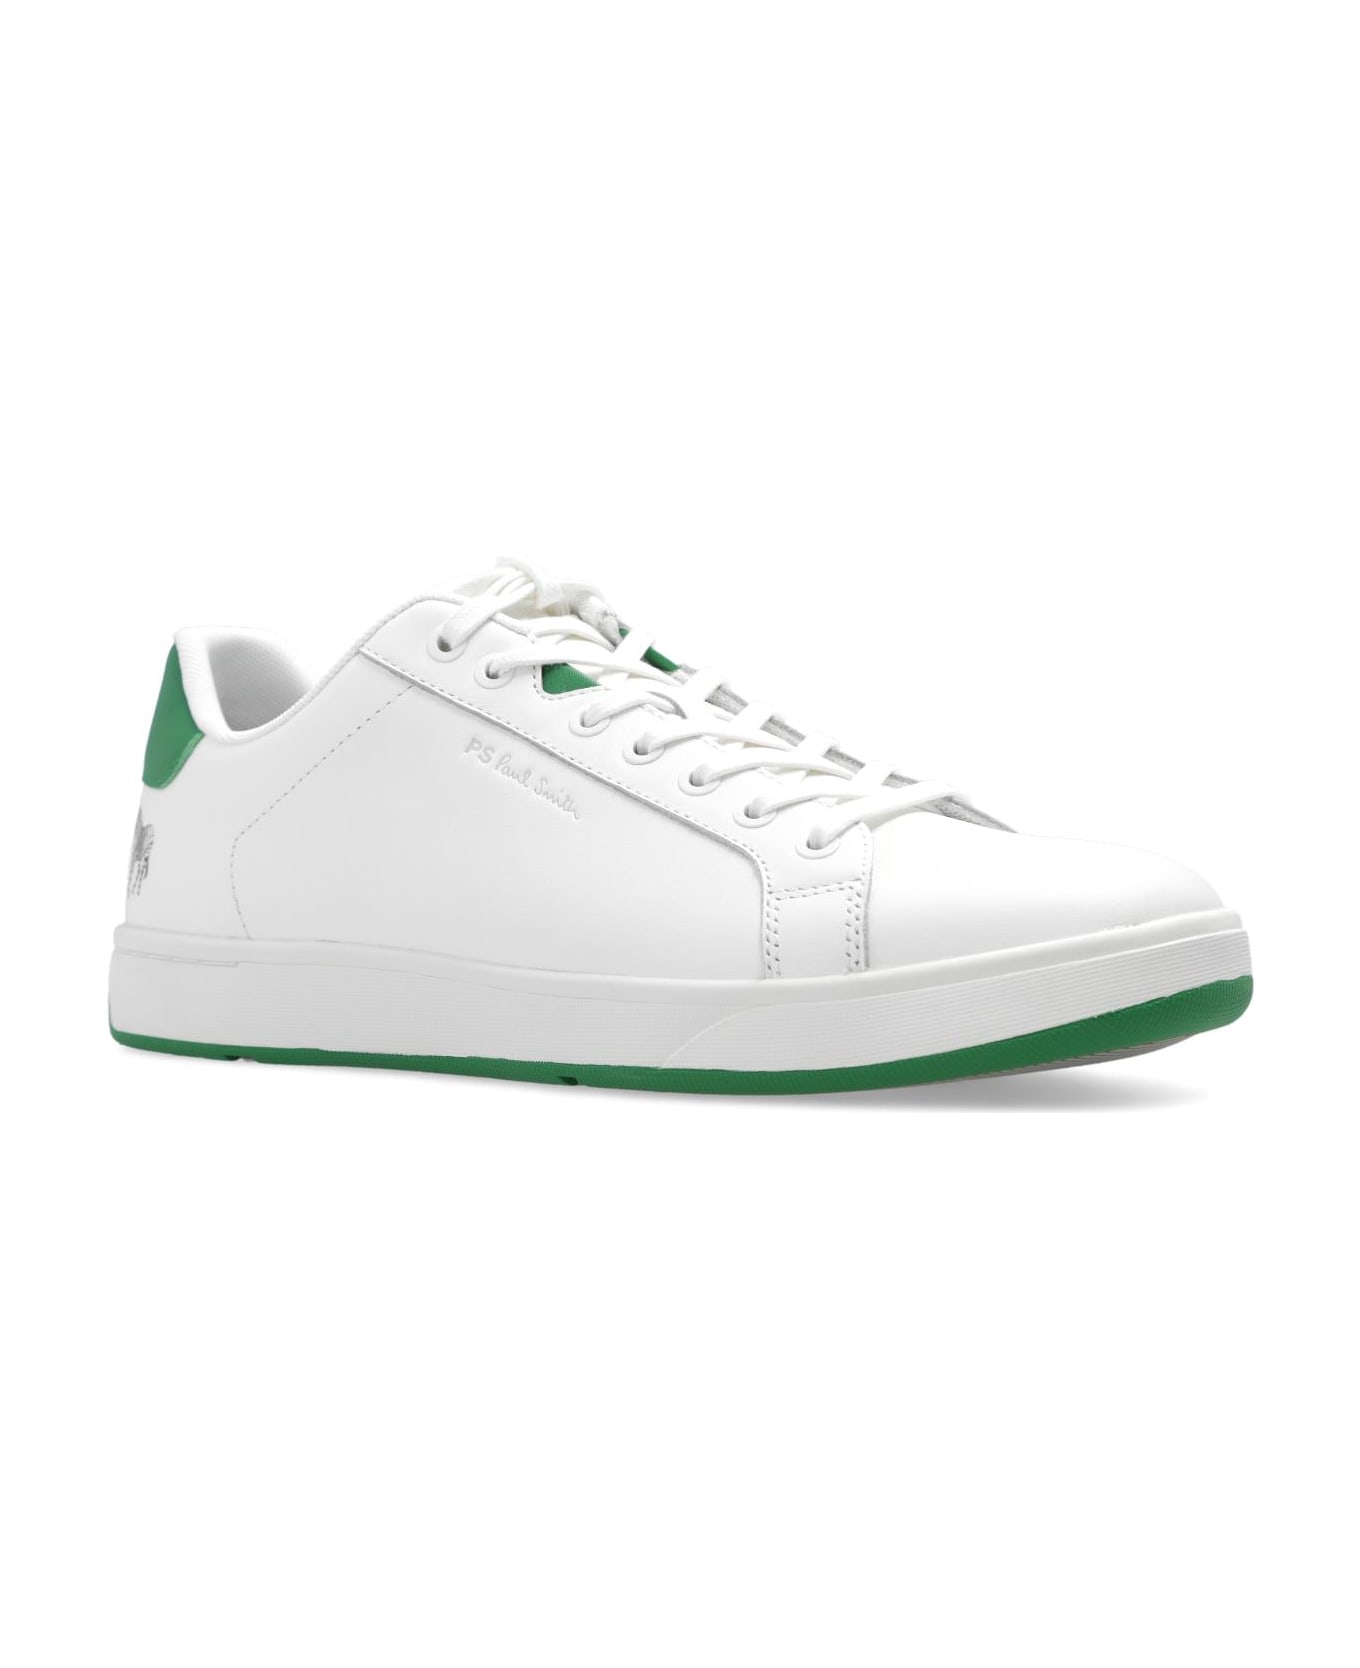 Paul Smith Ps Paul Smith 'albany' Sneakers - White